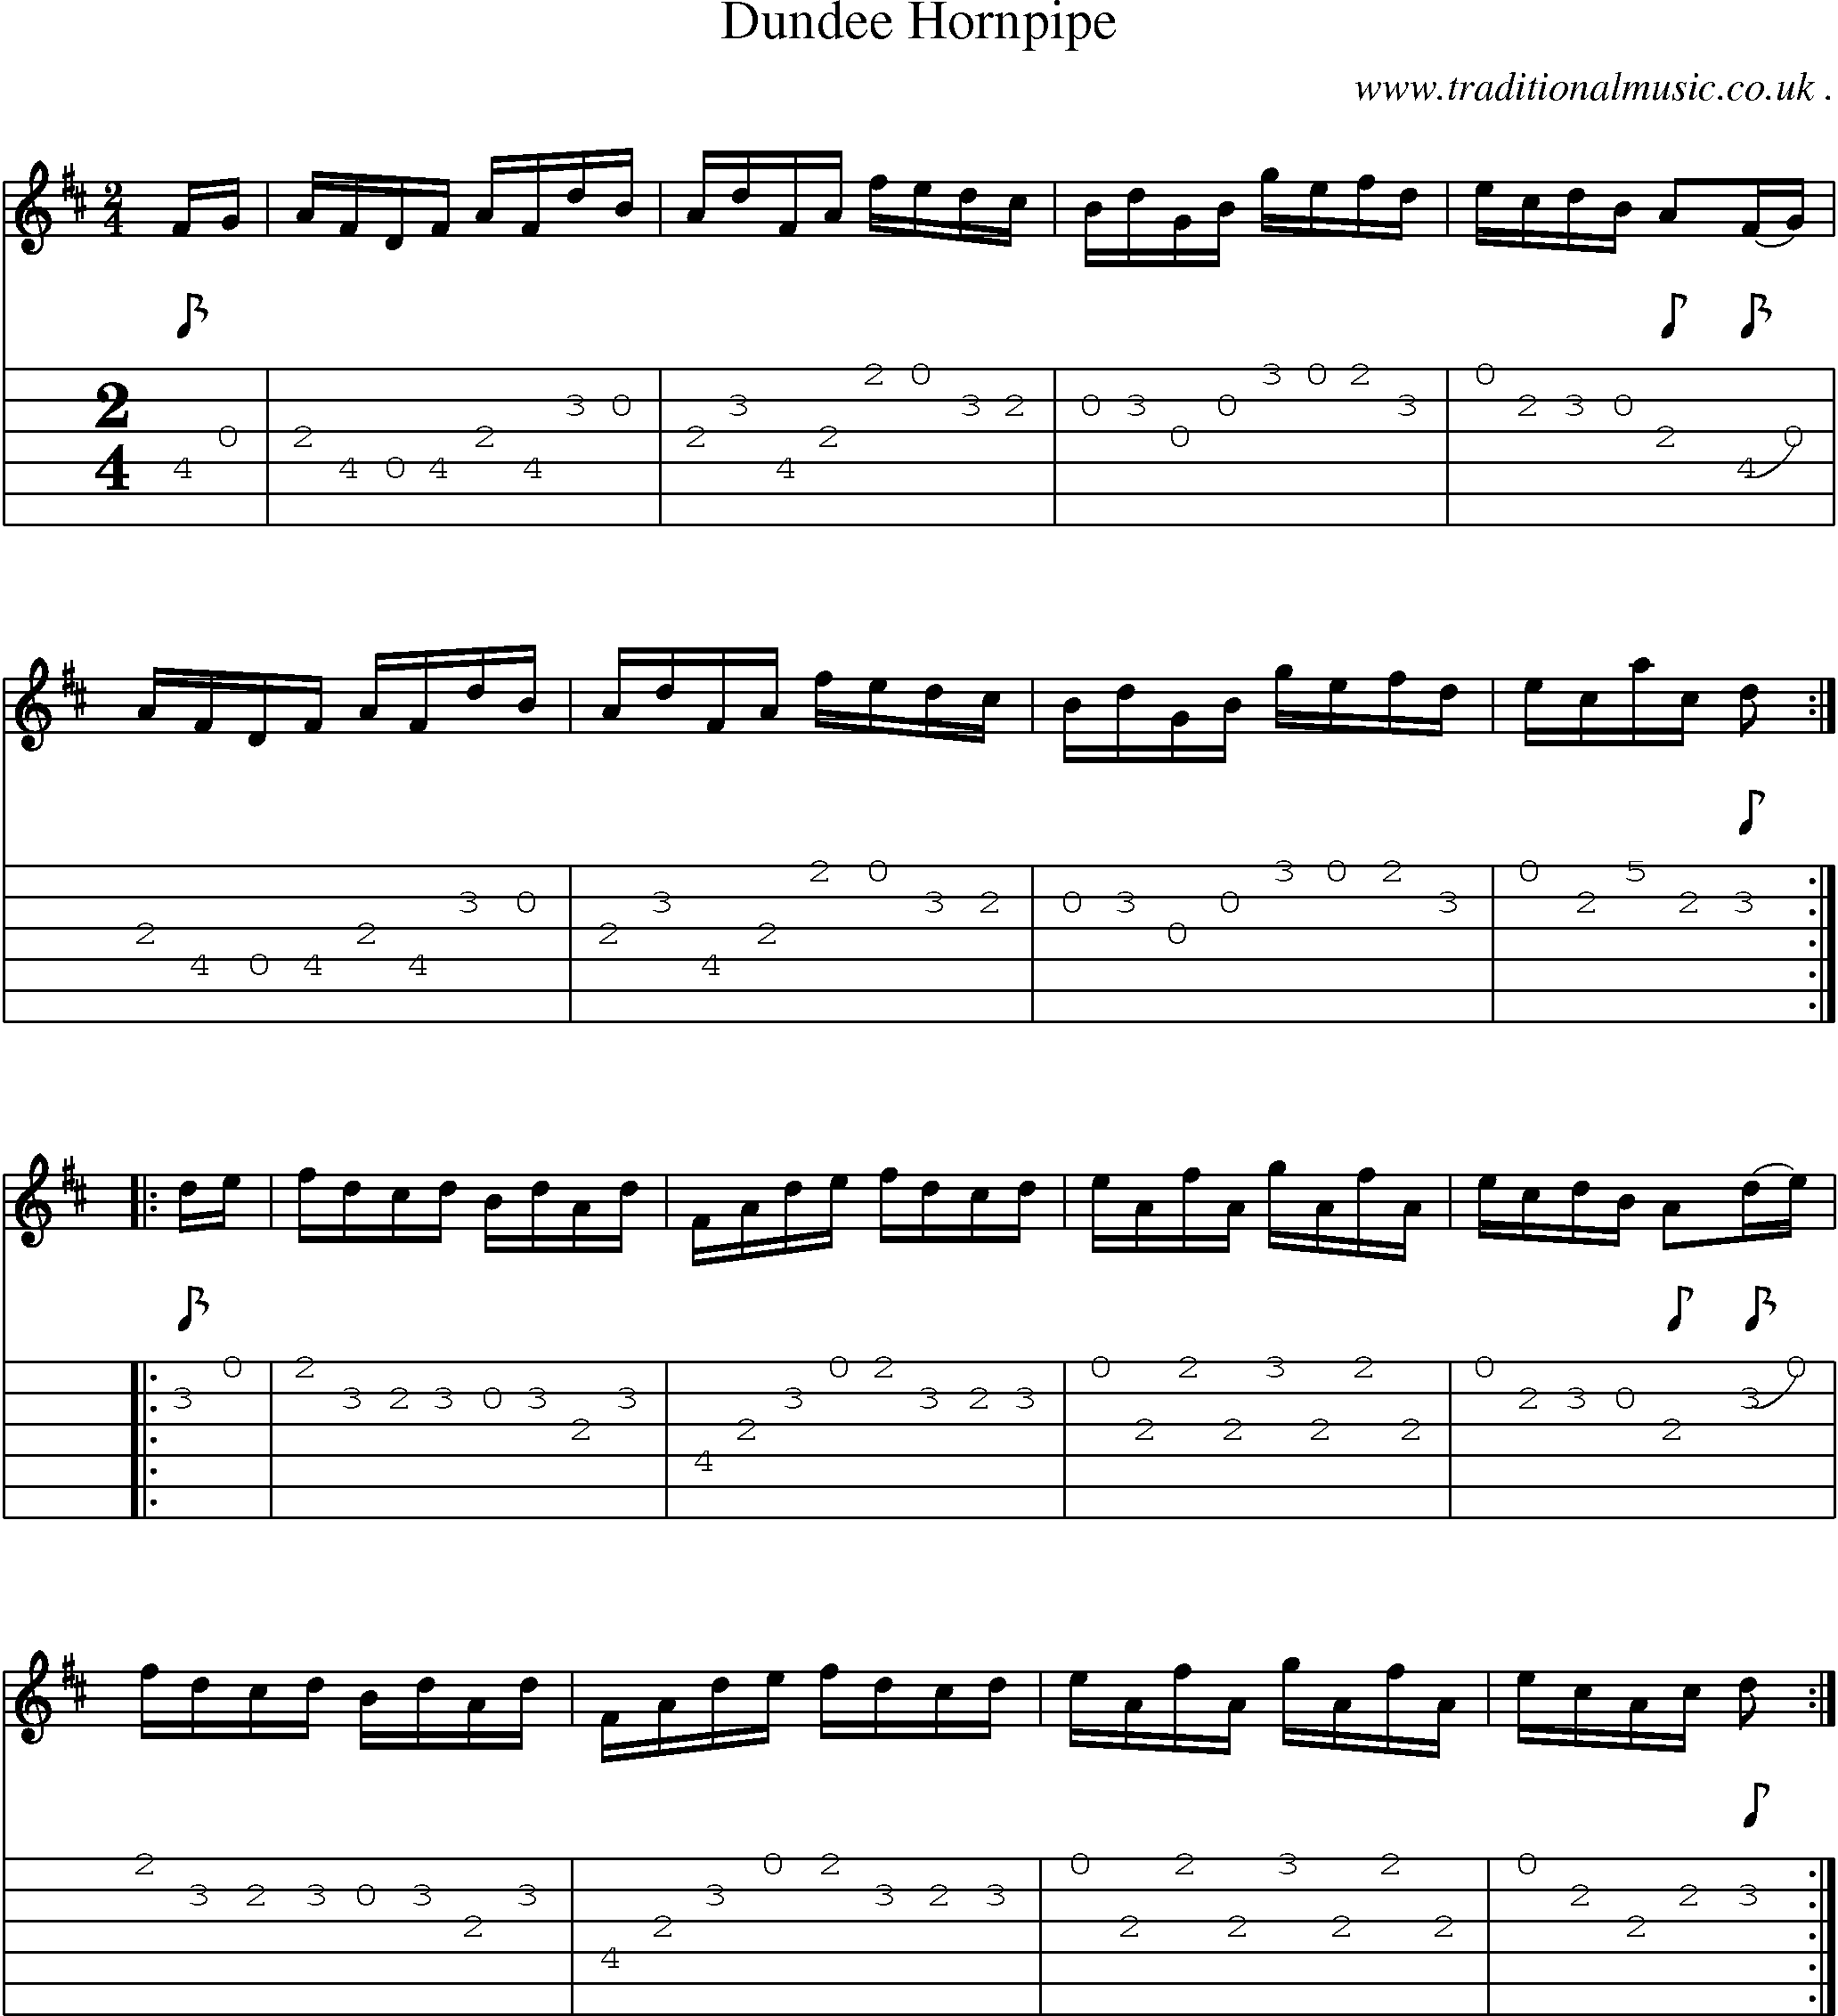 Sheet-Music and Guitar Tabs for Dundee Hornpipe